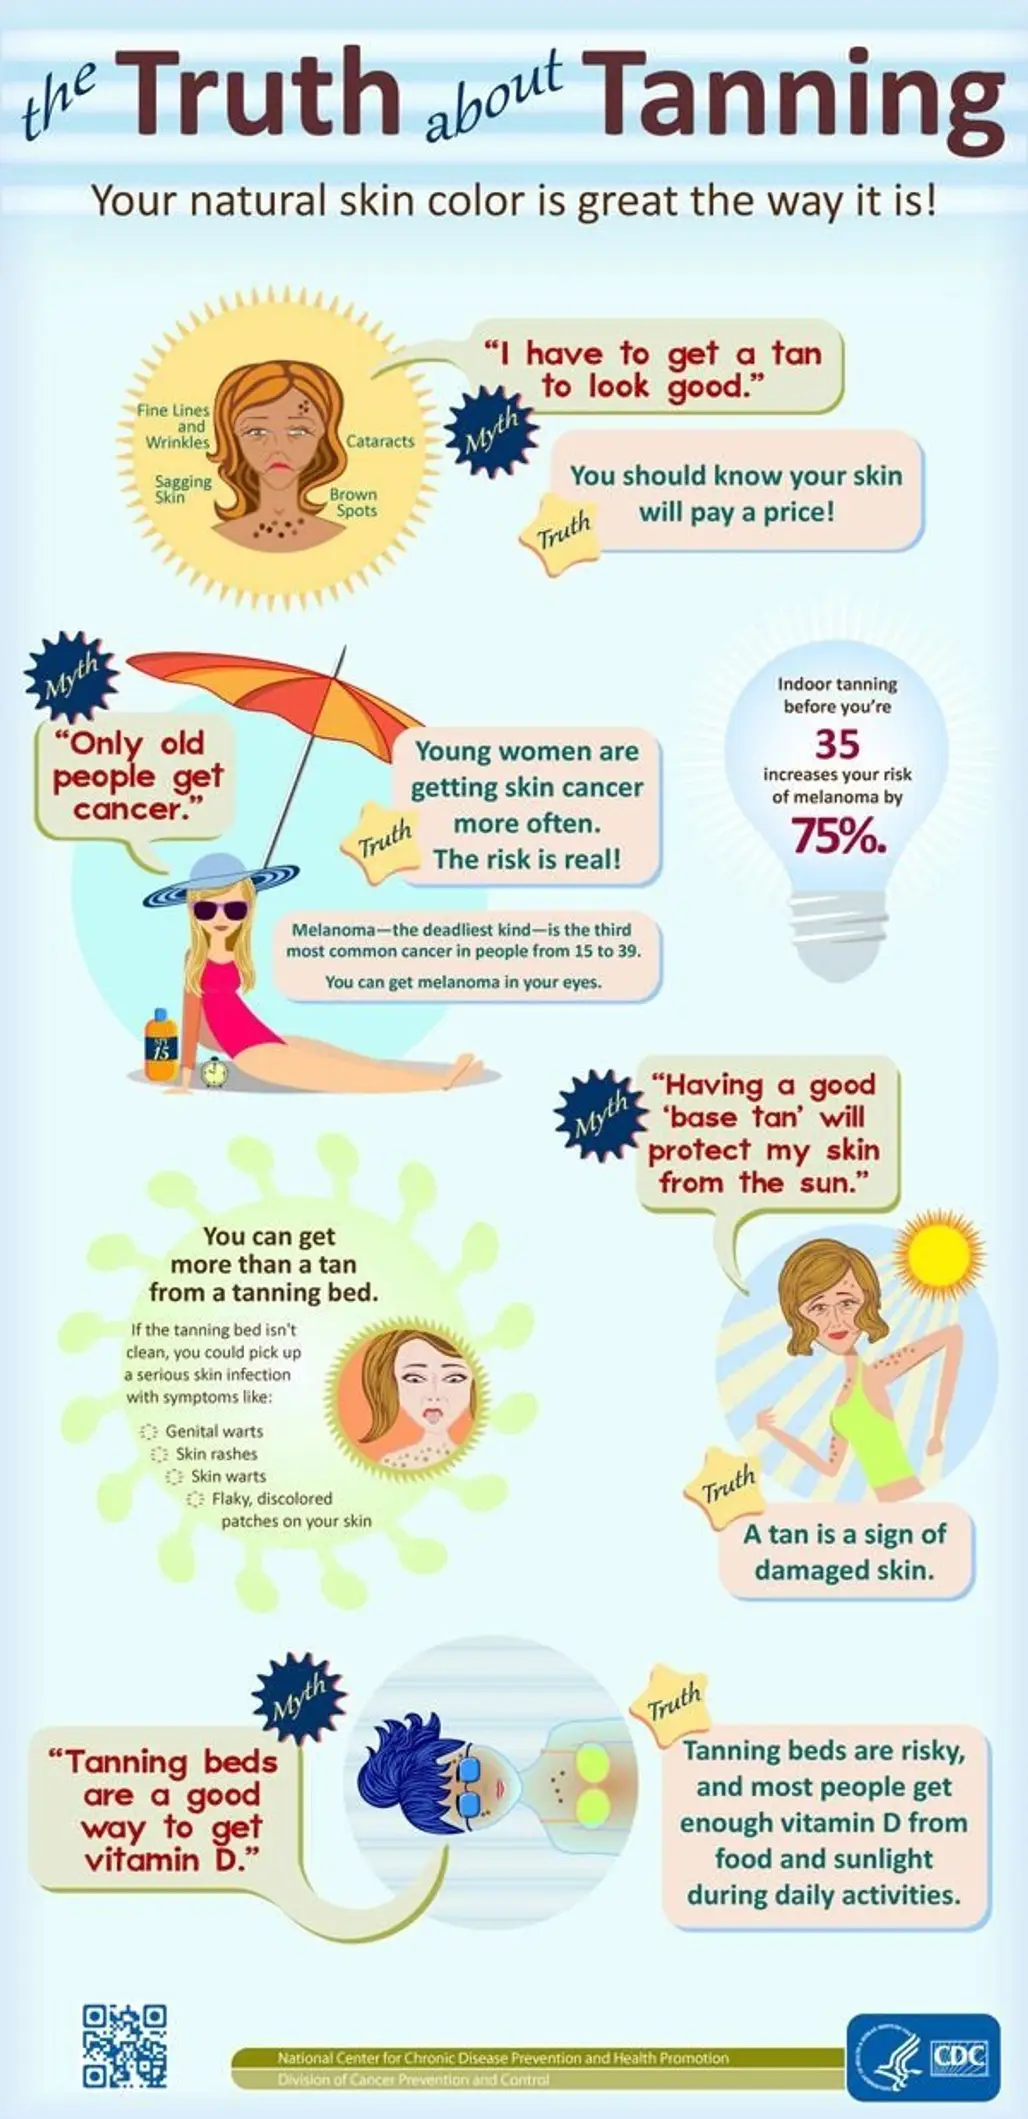 The Truth about Tanning